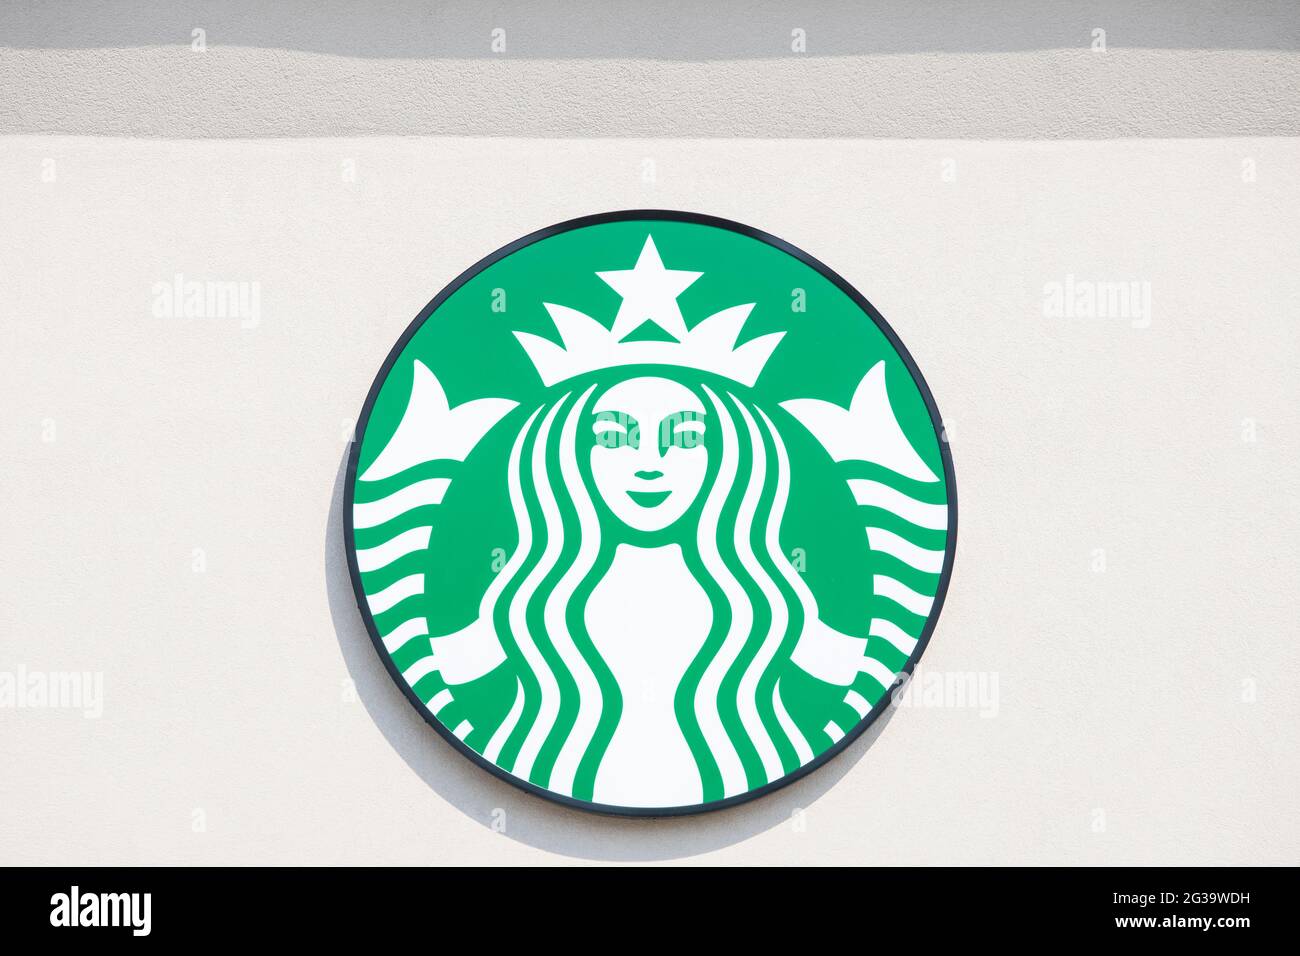 Starbucks logo is on the outside wall of a building. Starbucks coffee shop. Stock Photo